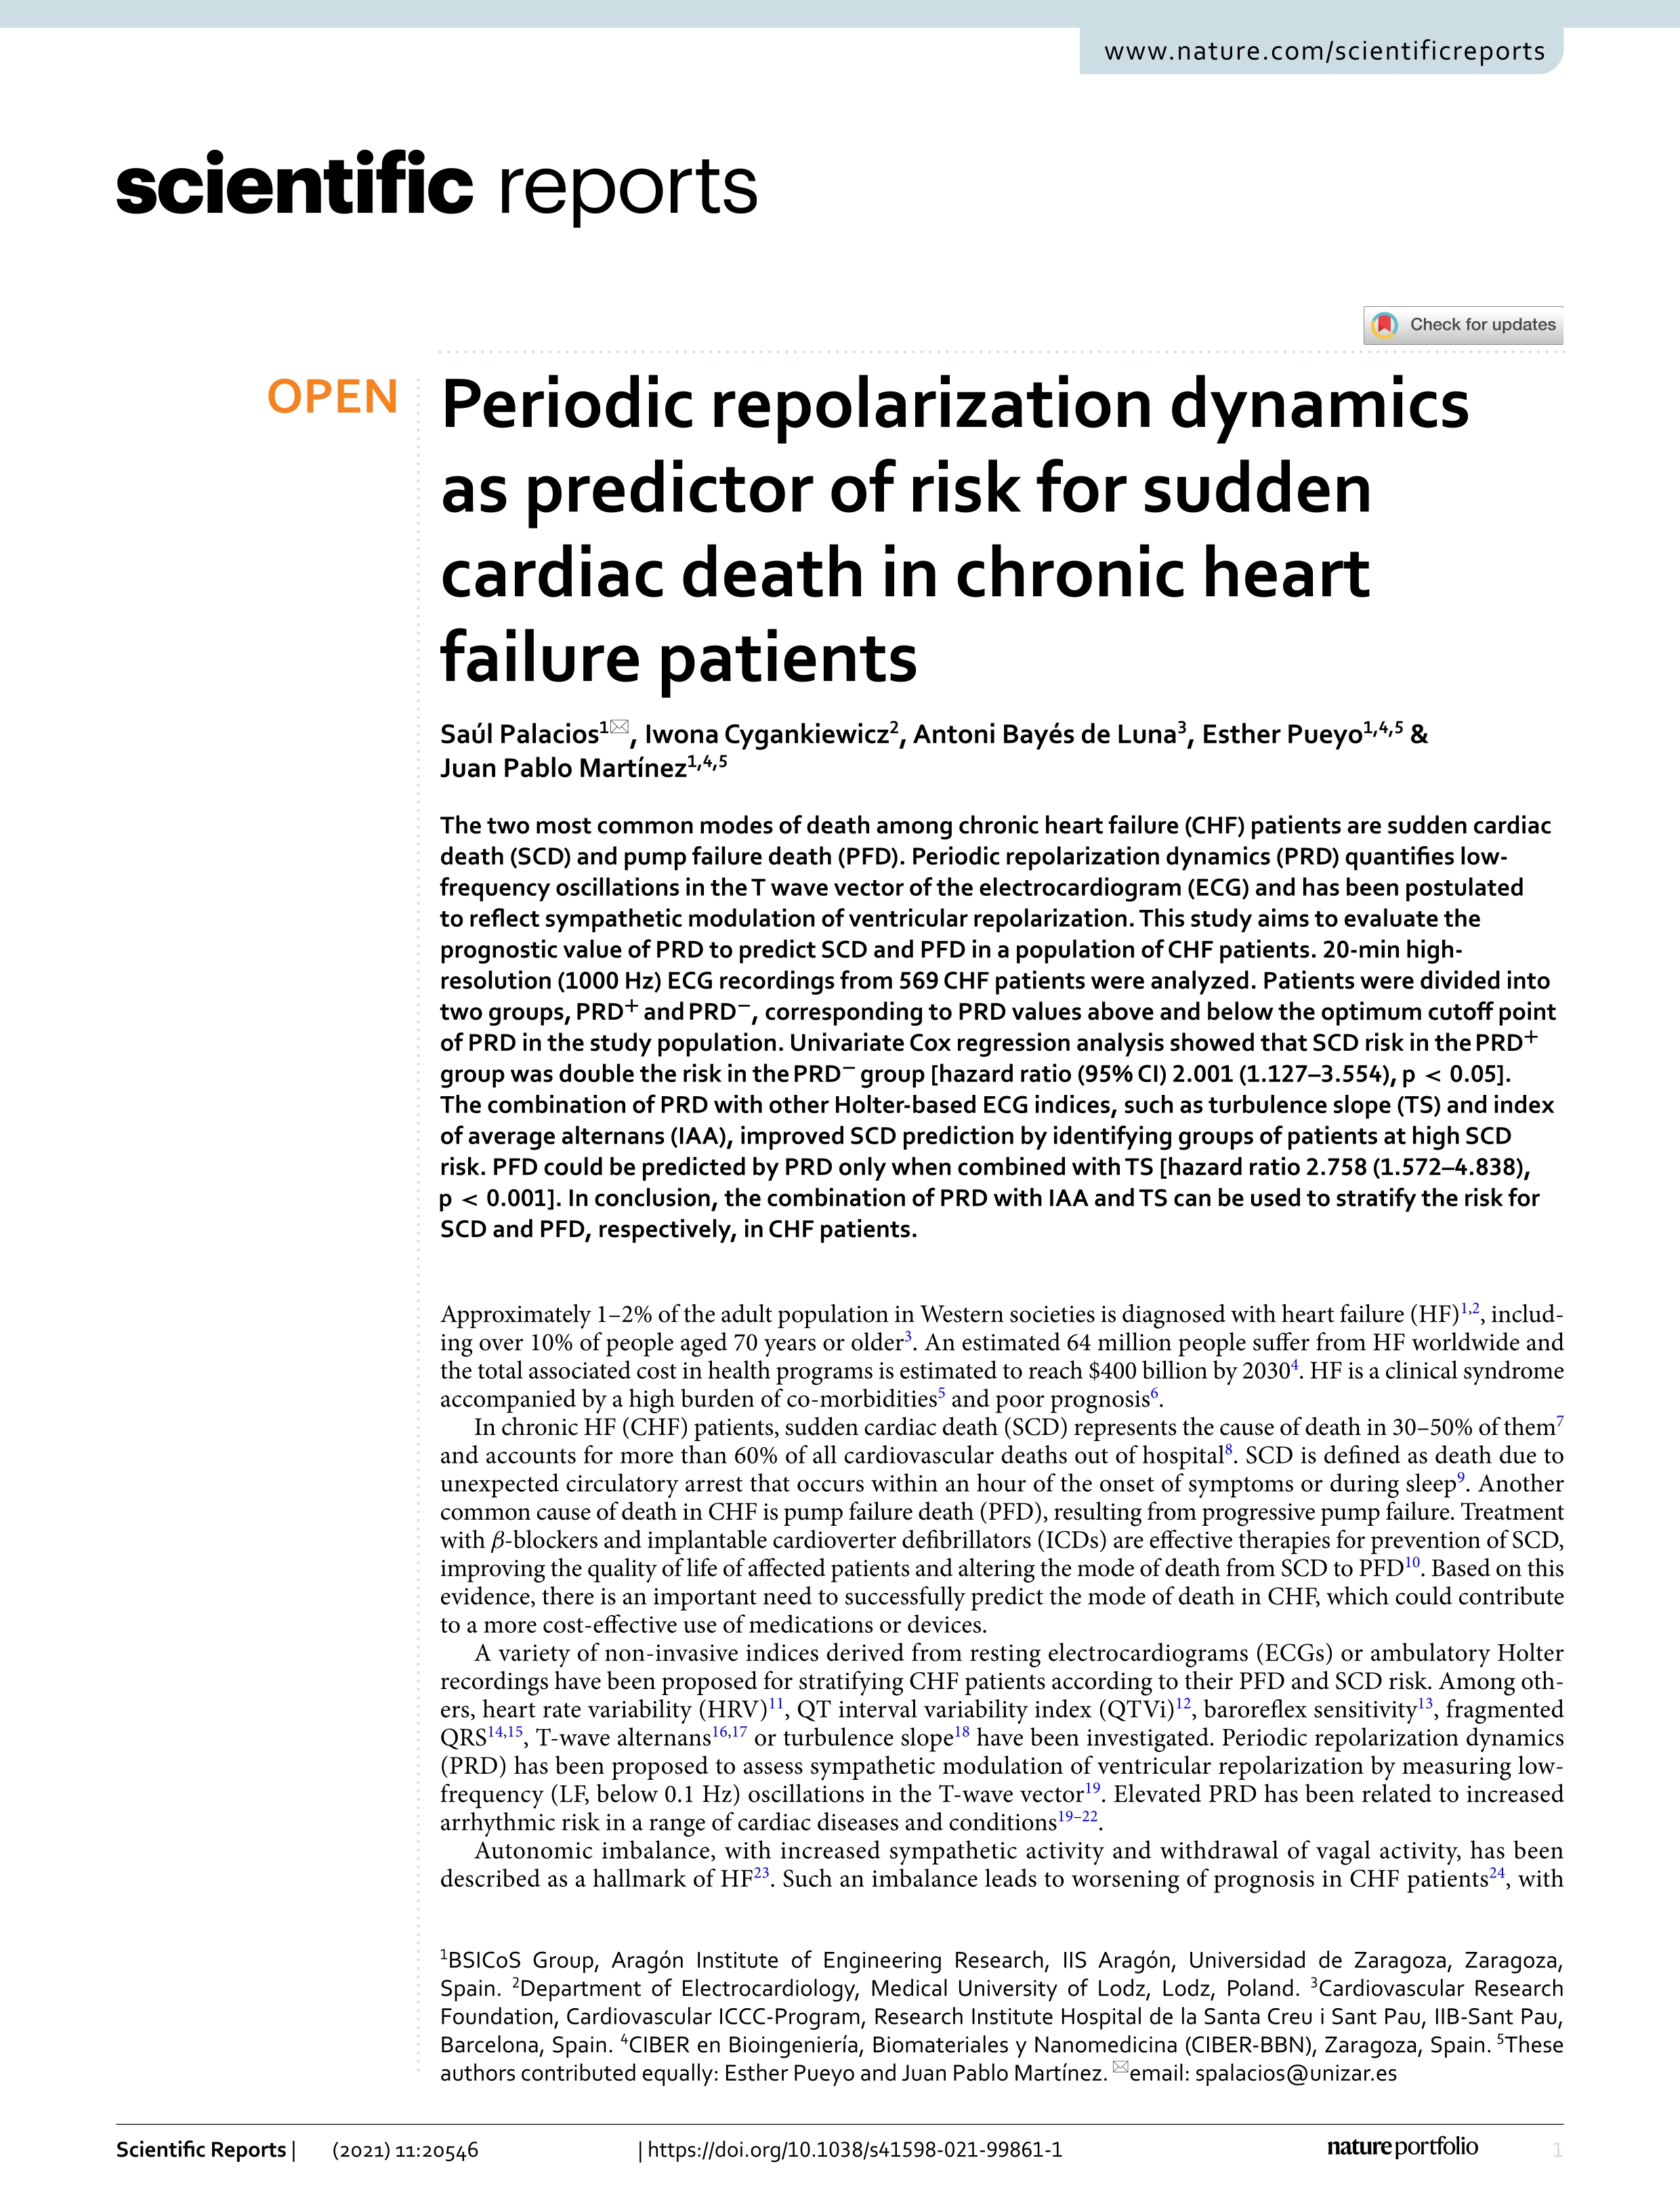 Periodic repolarization dynamics as predictor of risk for sudden cardiac death in chronic heart failure patients